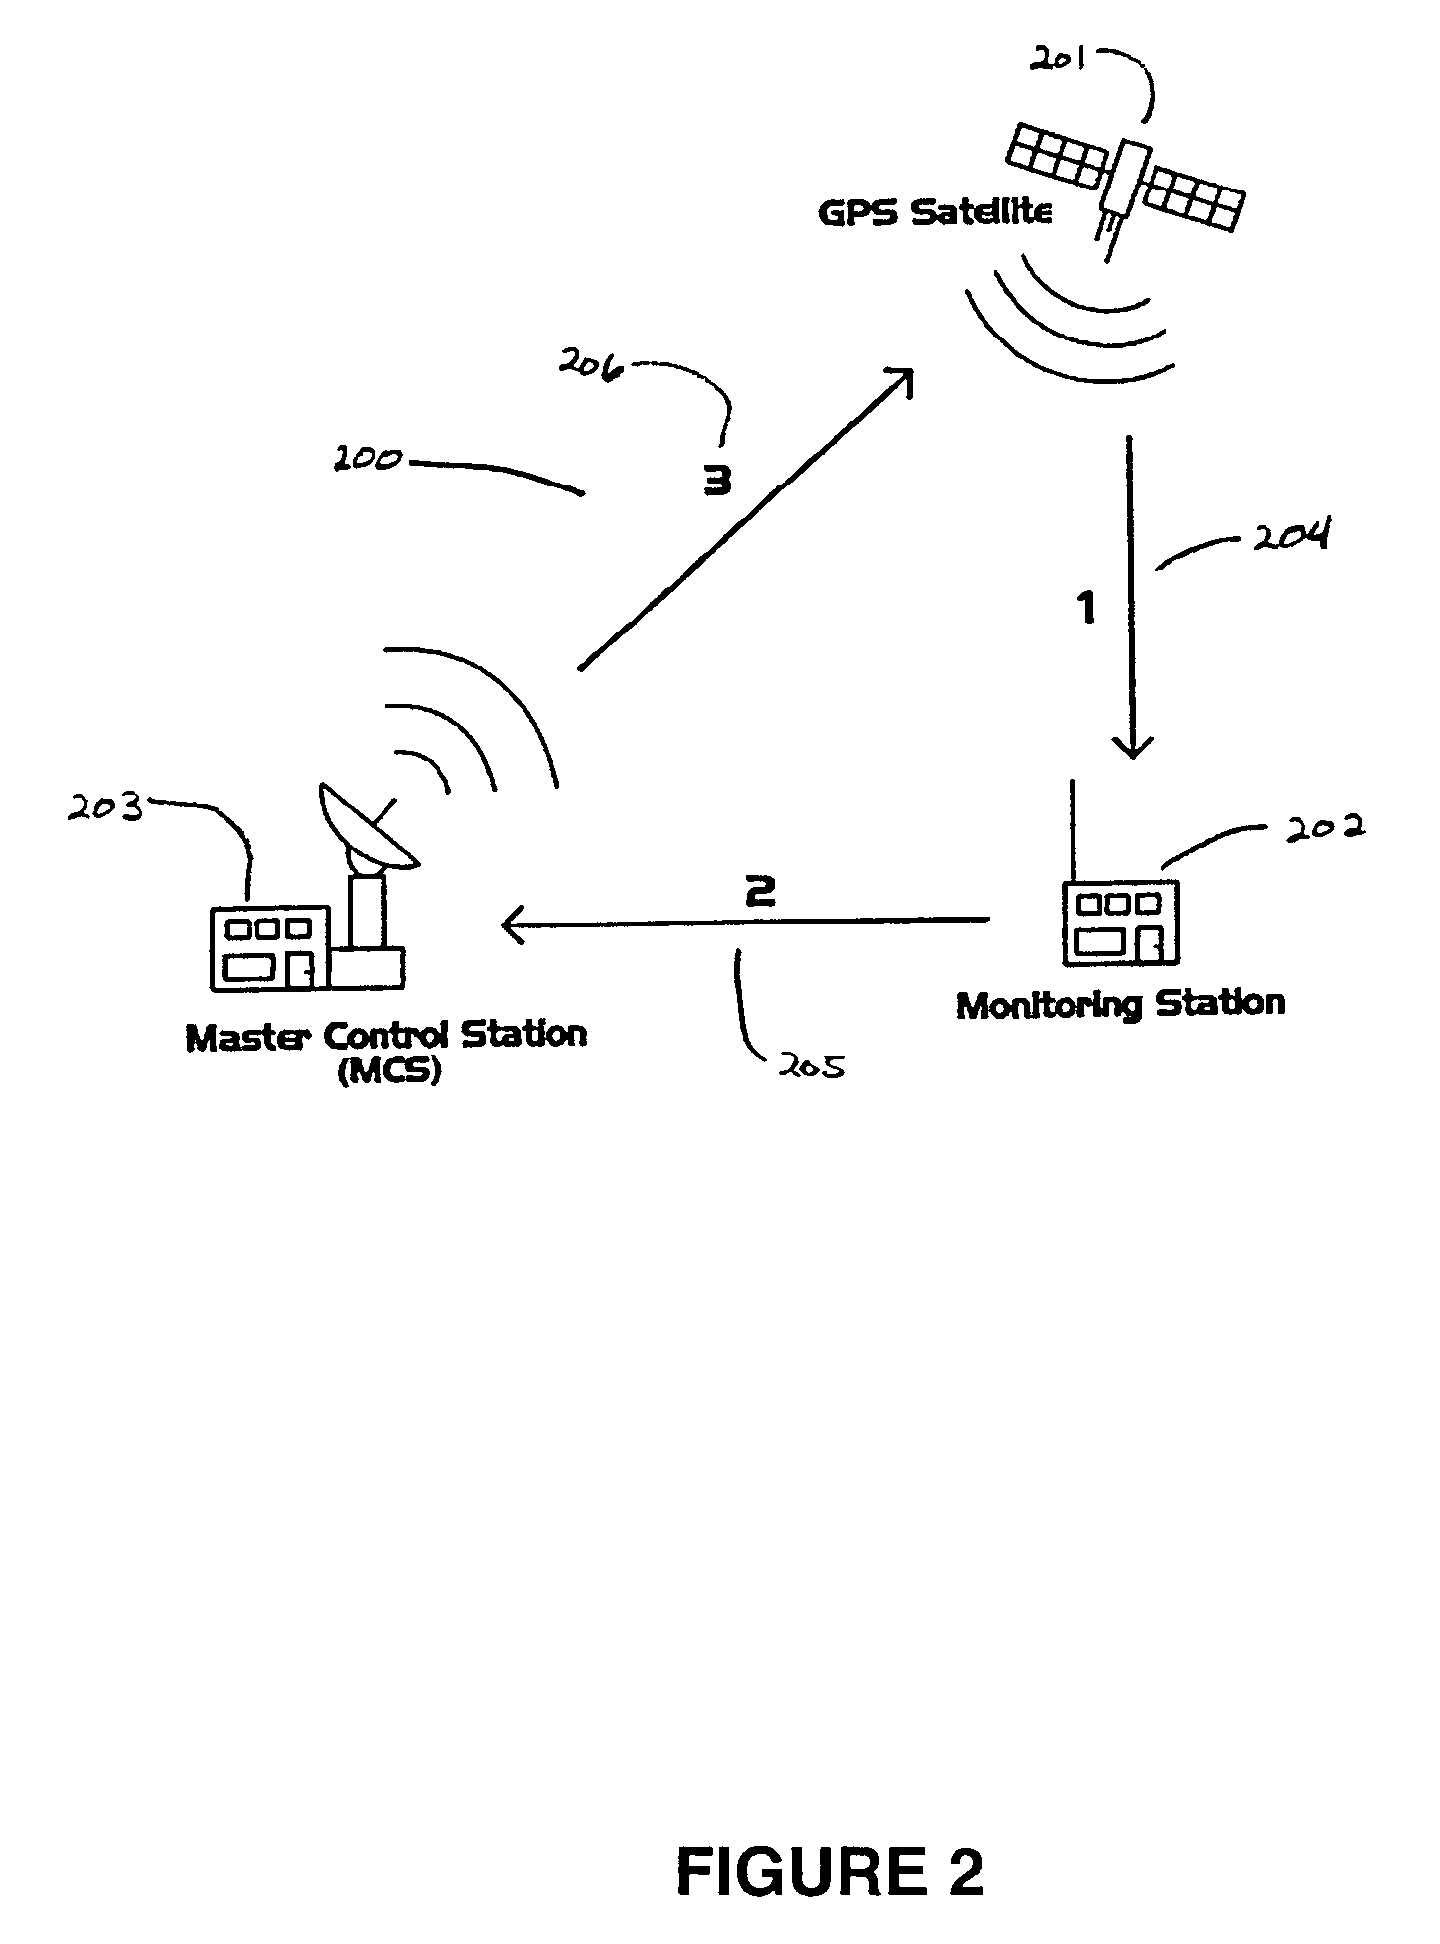 Method and system for tracking the positioning and limiting the movement of mobile machinery and its appendages